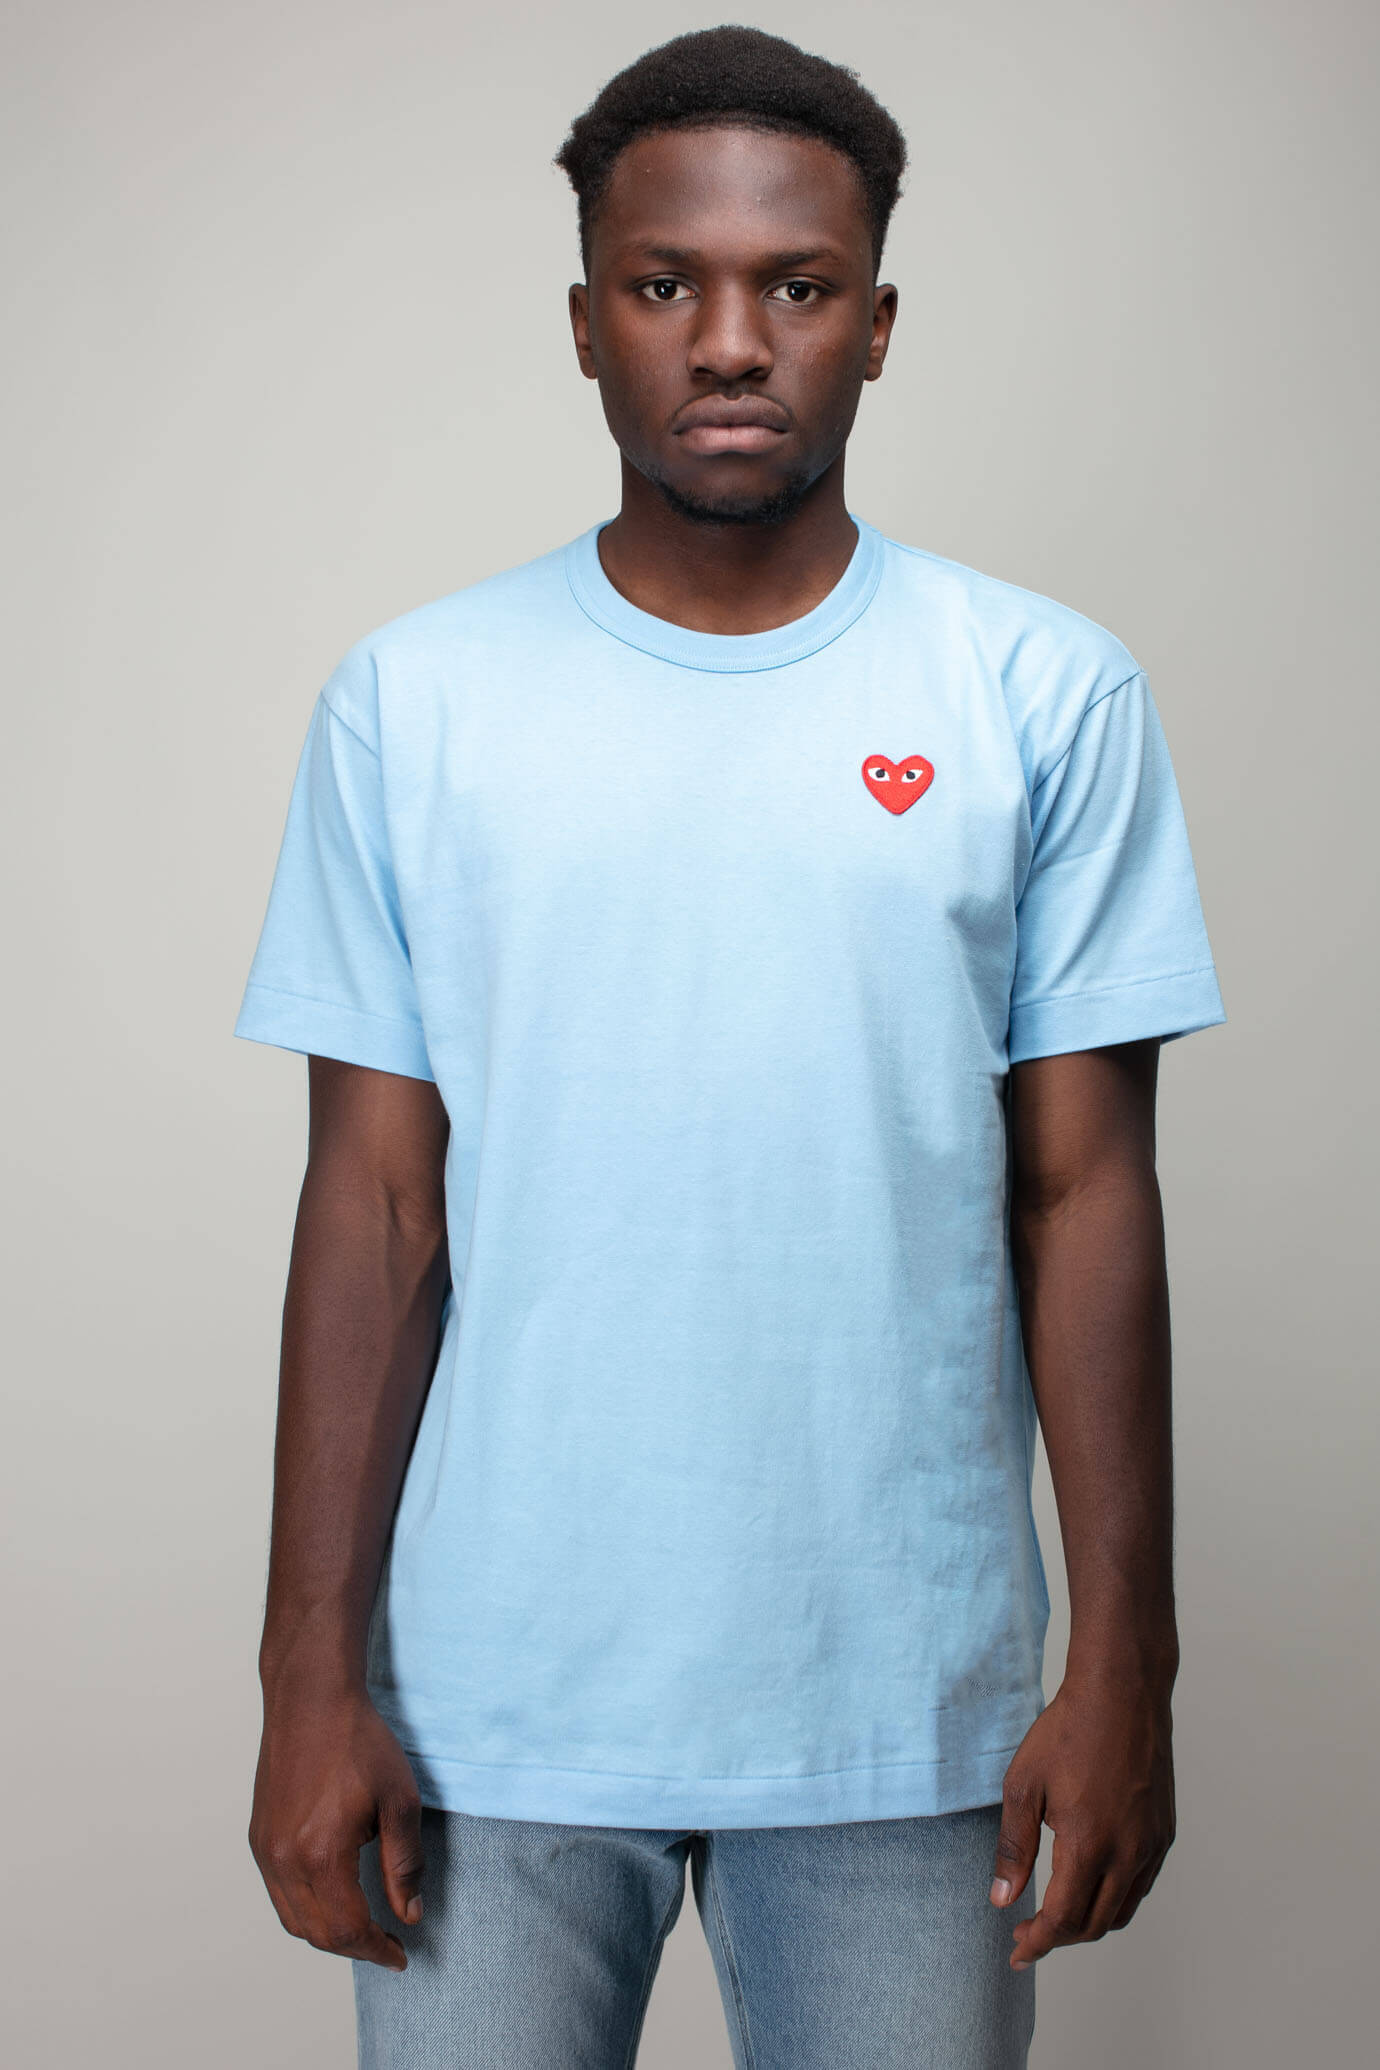 CDG Play Shirt blue Red Heart – LABELS